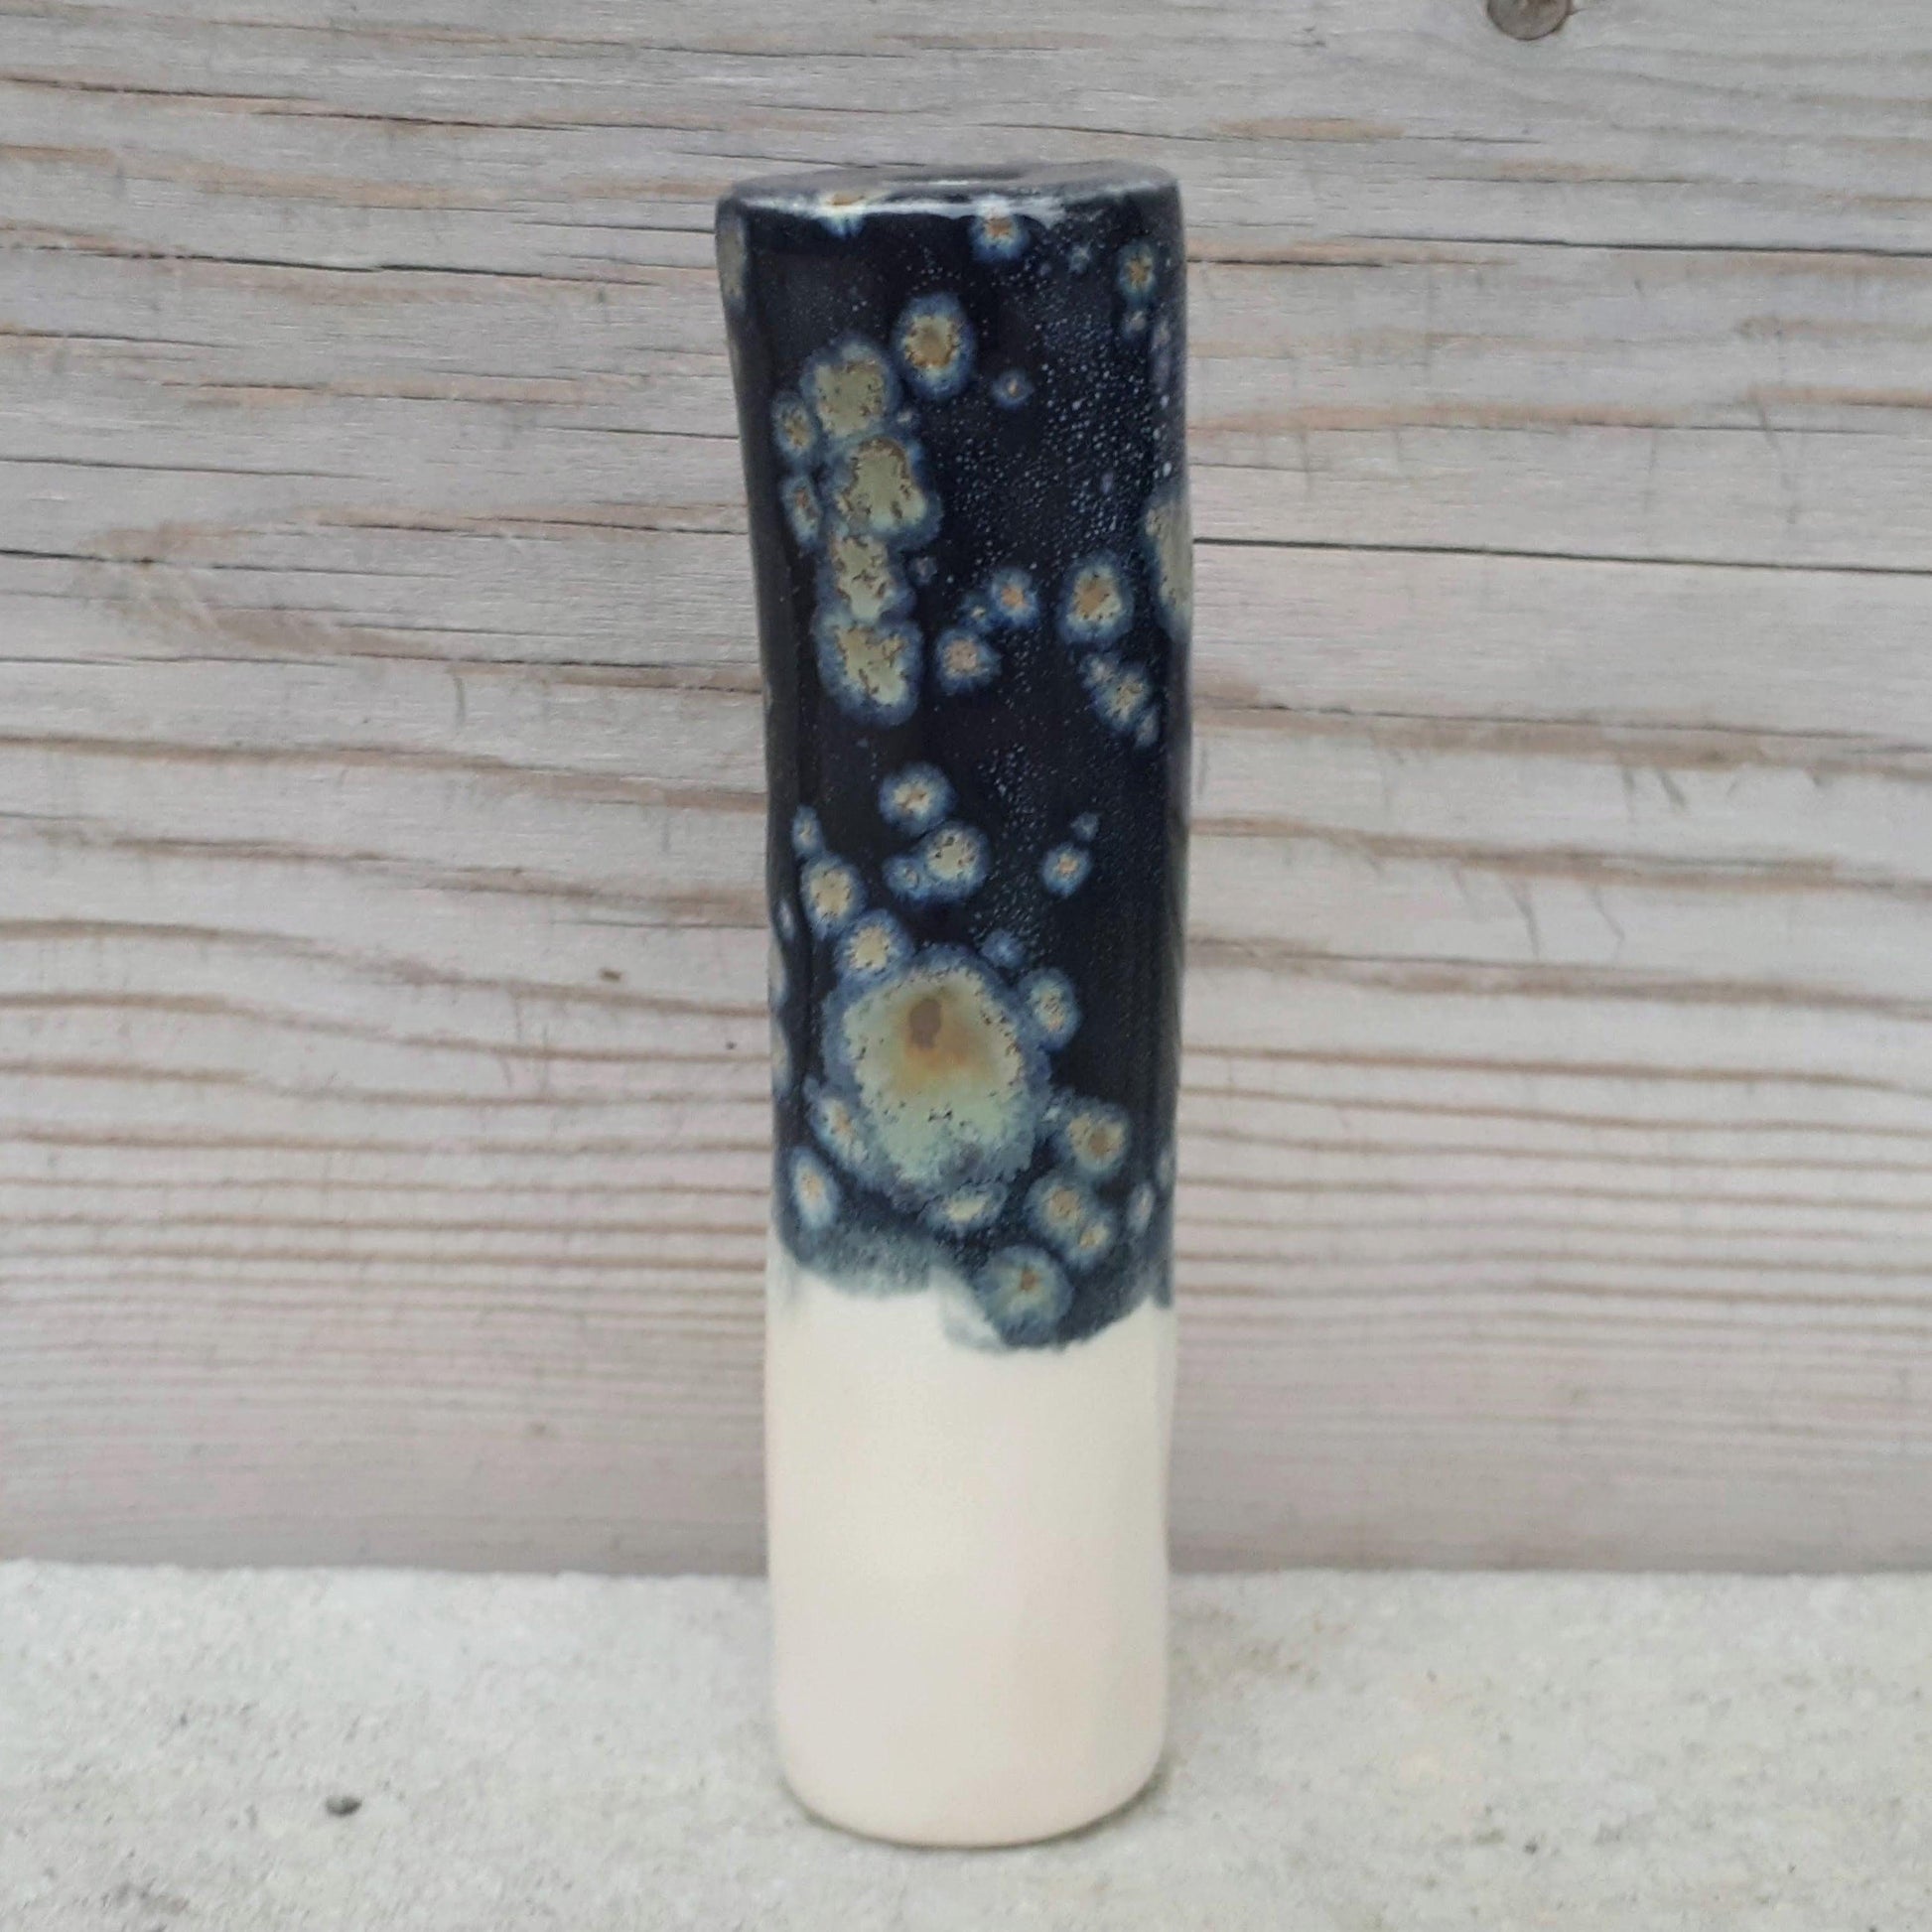 Starry Night Original Cannabis Pipe standing on end back view